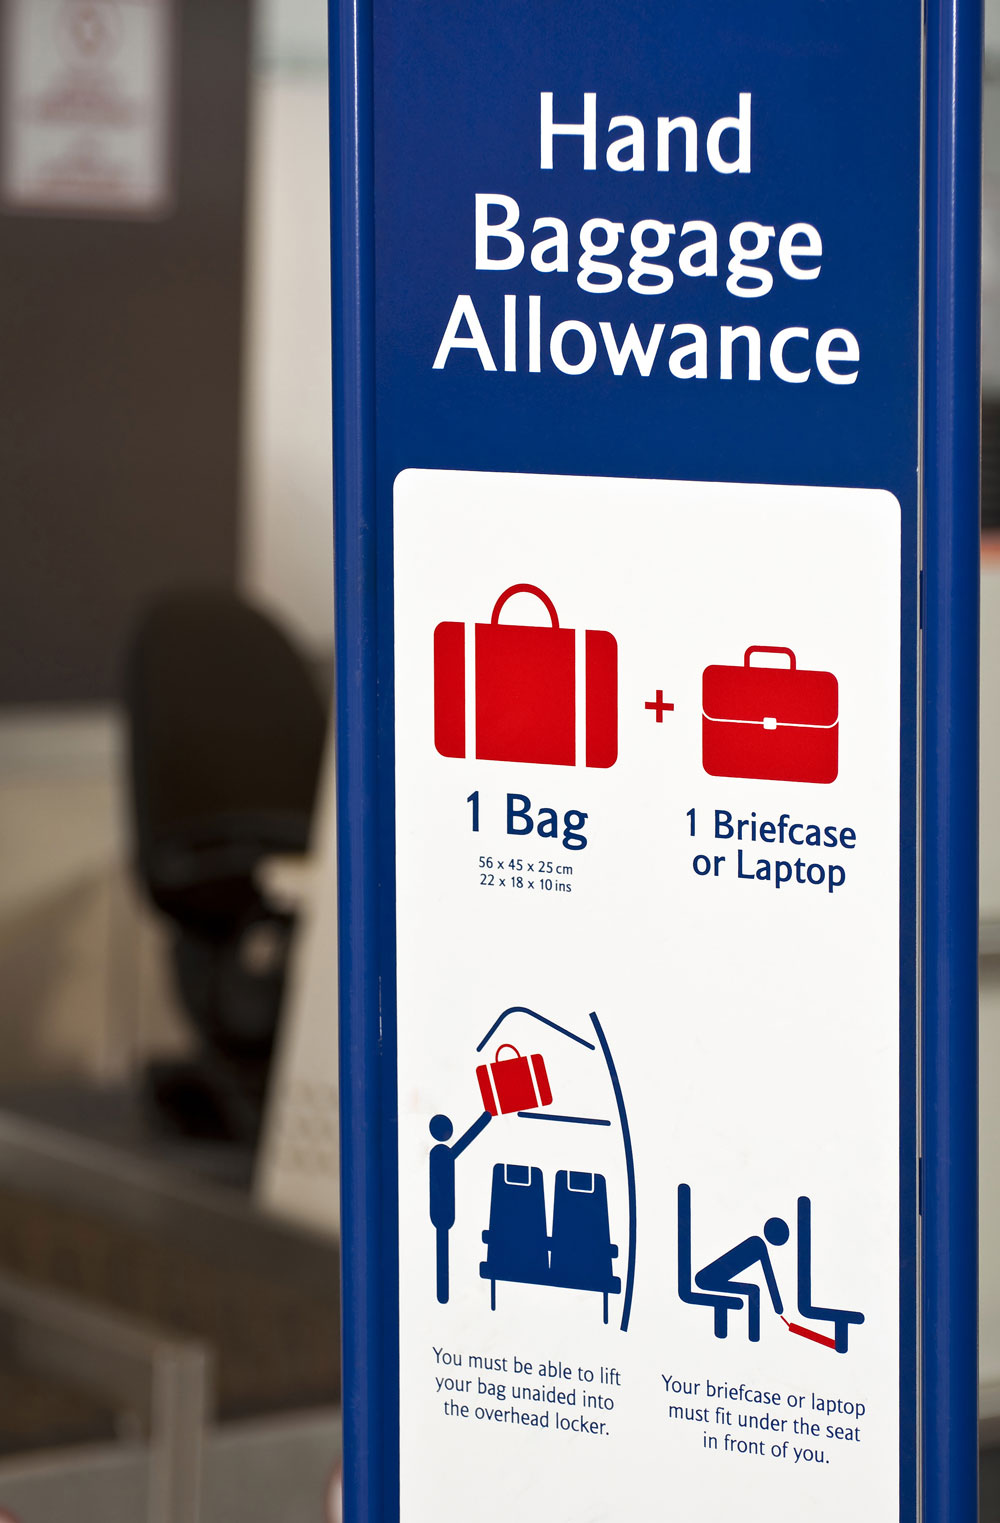 AIRLINE BAGGAGE ALLOWANCE AND AIRPORT SECURITY REGULATIONS